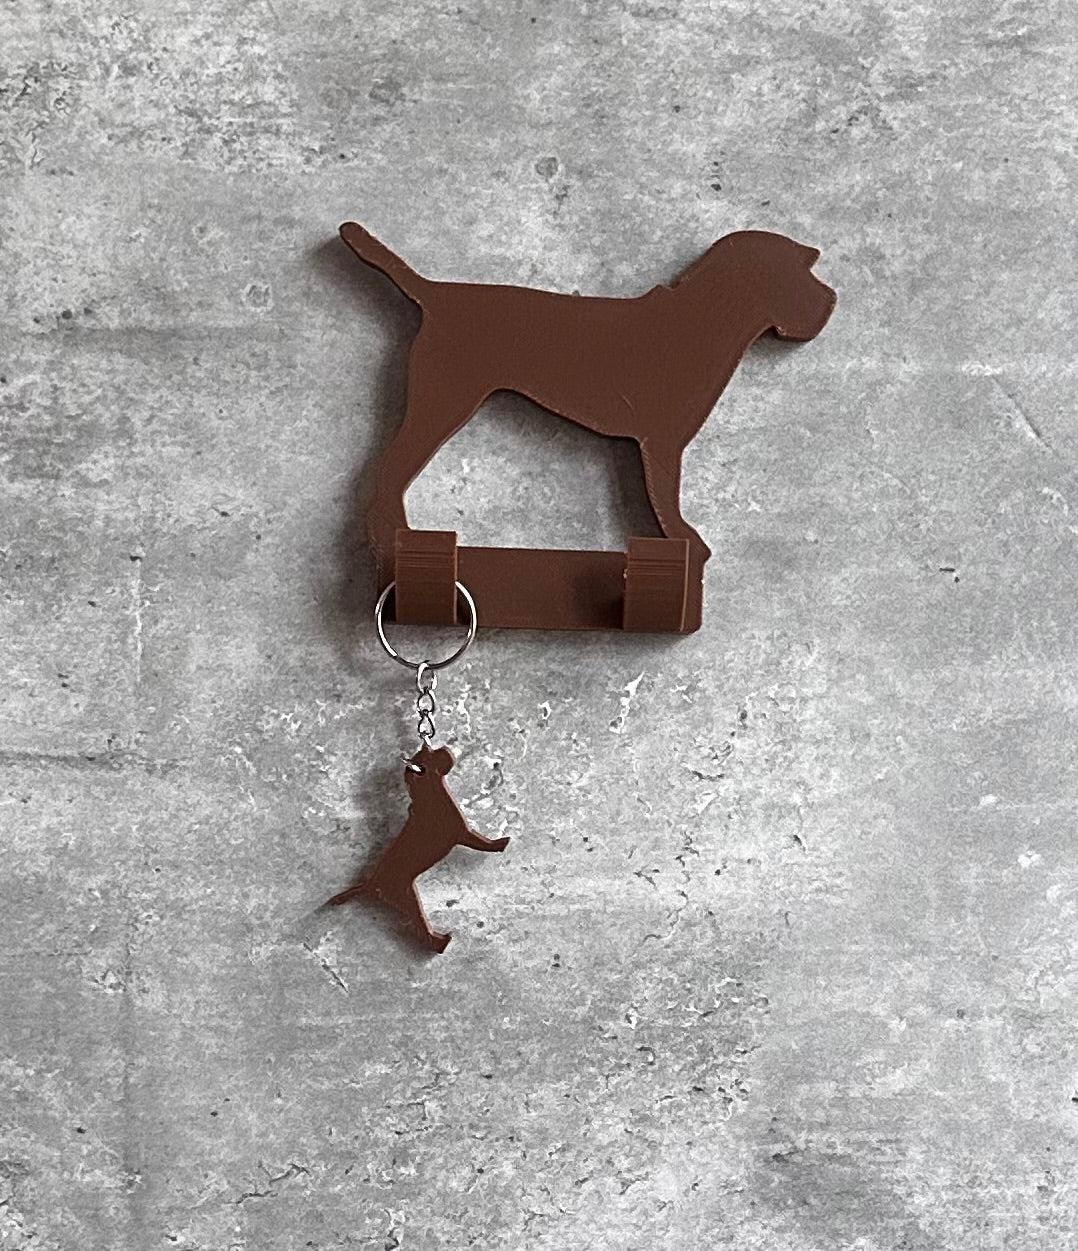 Personalised Border Terrier Dog Lead Hook | 3D Printed | Unique Personalised Gifts